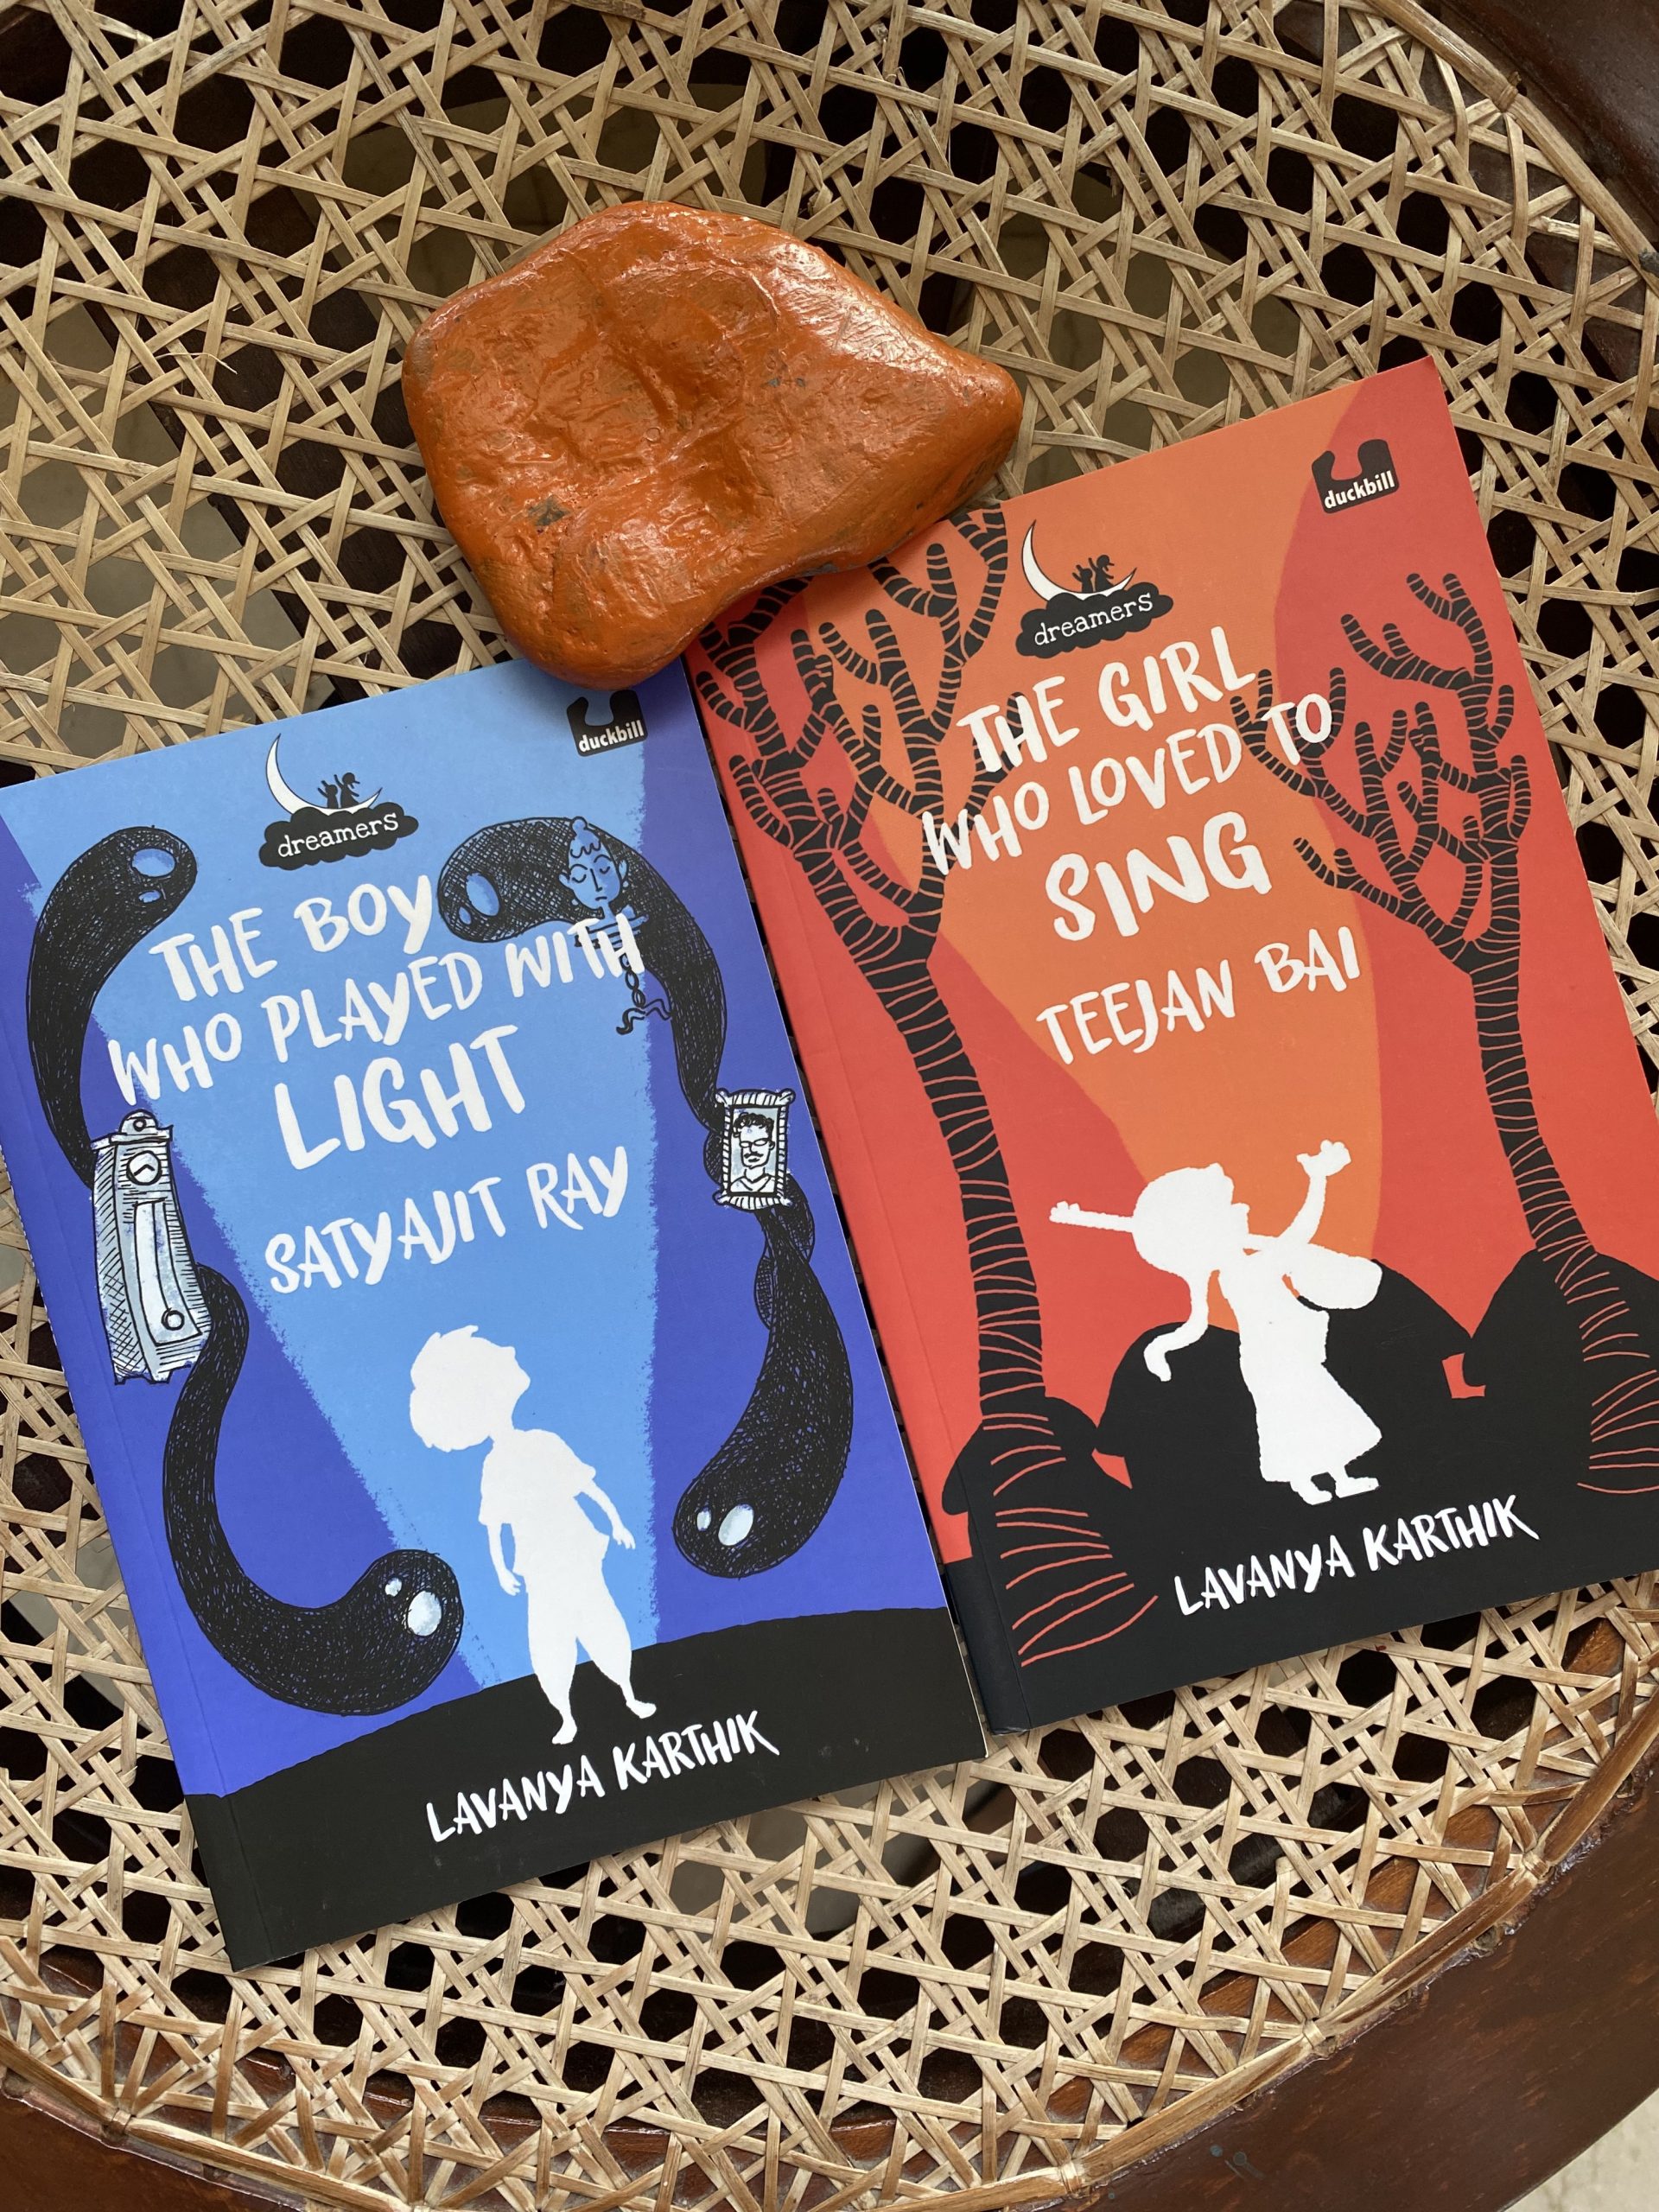 Two books: The Boy Who Played with Light- Satyajit Ray and The Girl Who Loved to Sing- Teejan Bai, both written by Lavanya Karthik, published by duckbill (Penguin) spin a tale of dreams and dreamers.